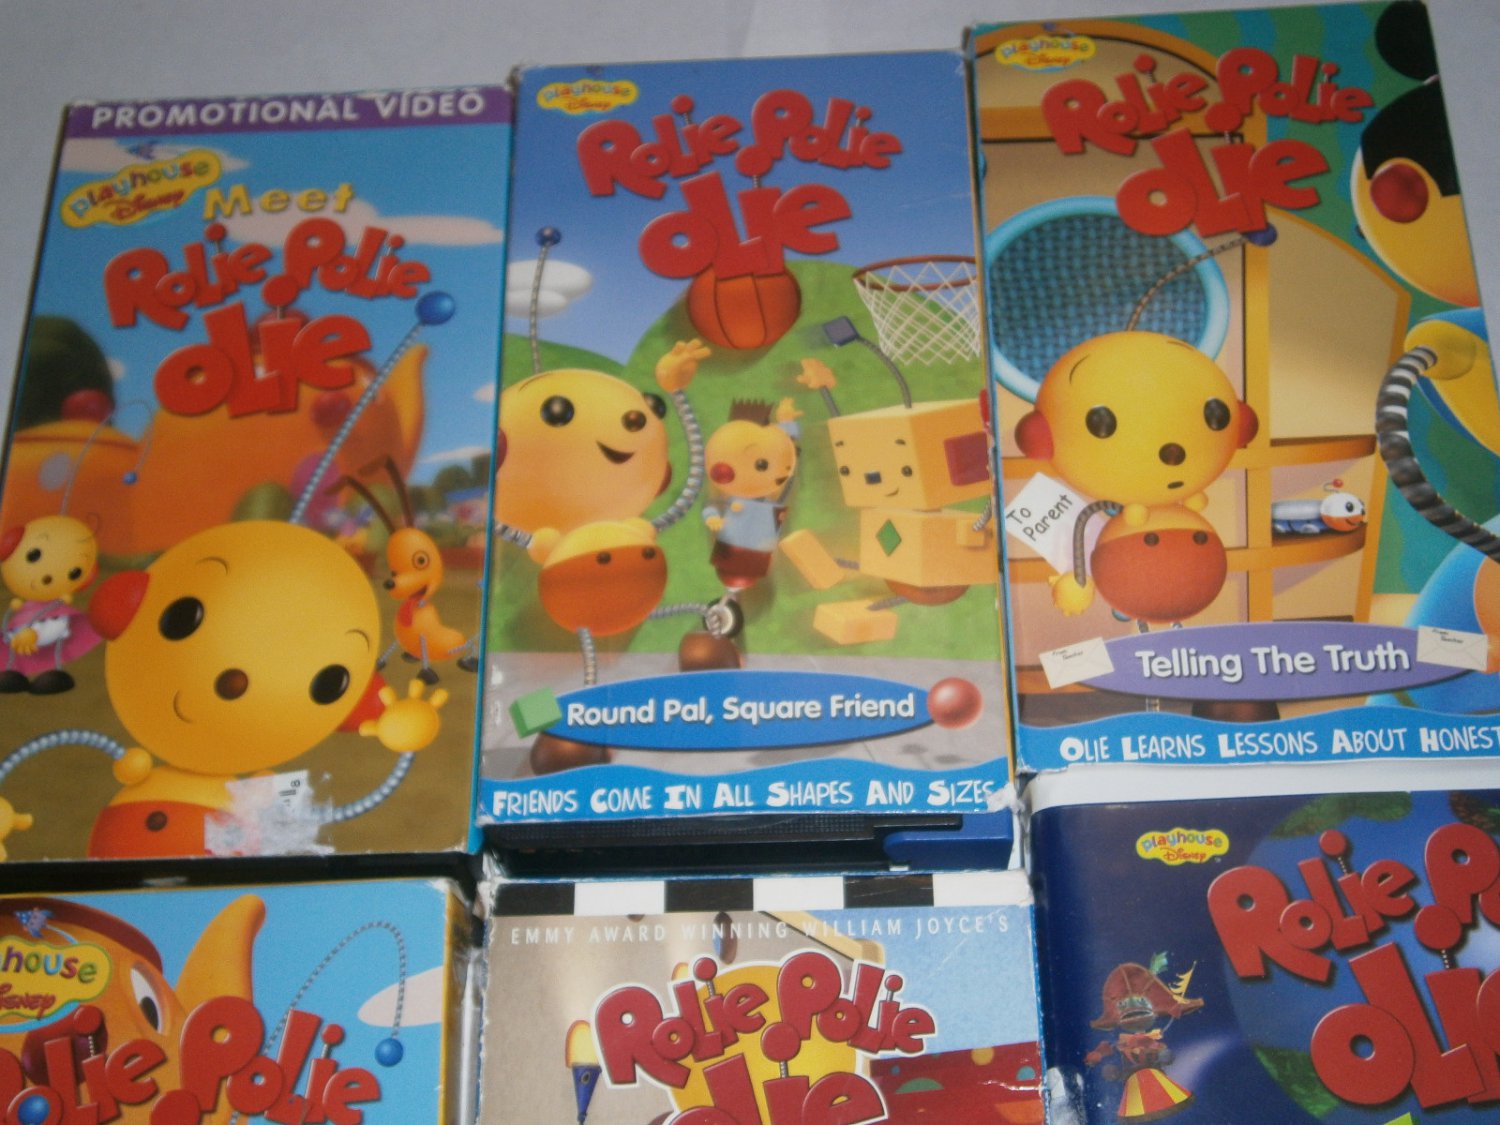 This lot includes the following Rolie Polie Olie videos or VHS tapes. 